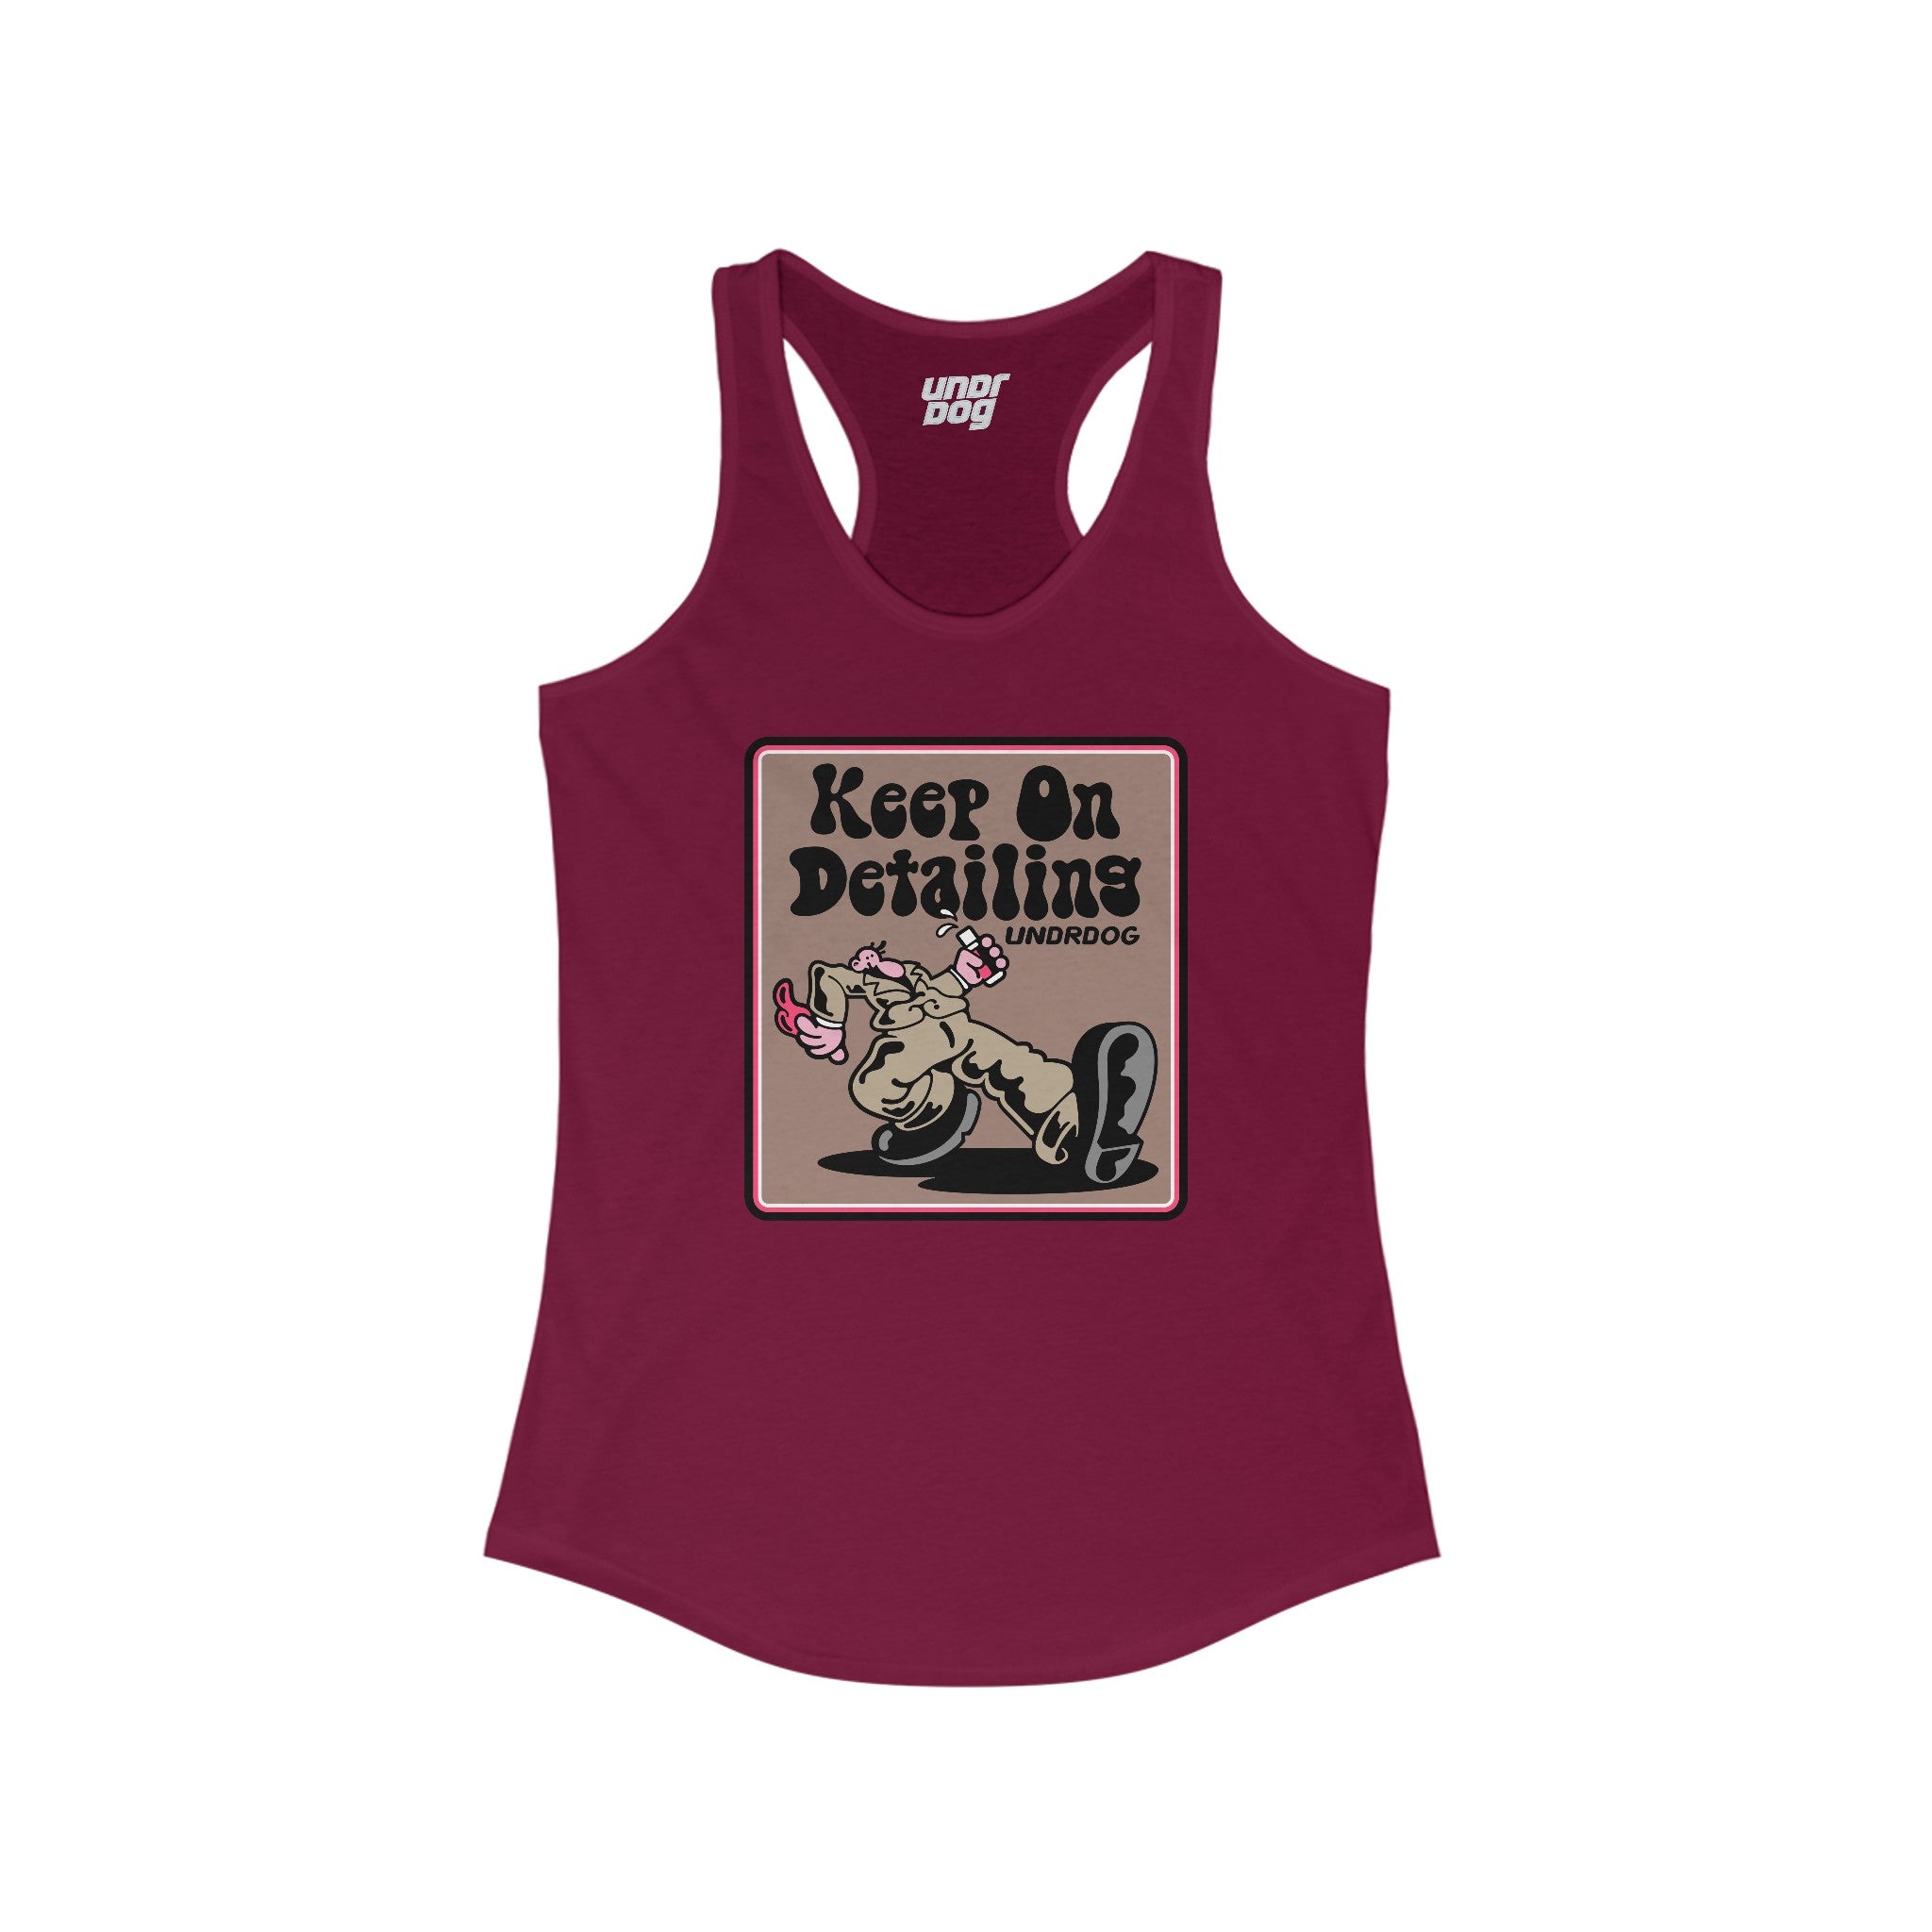 11960017510251370773_2048.jpg - Keep on Detailing v2 Women's Tank - Undrdog Surface Products